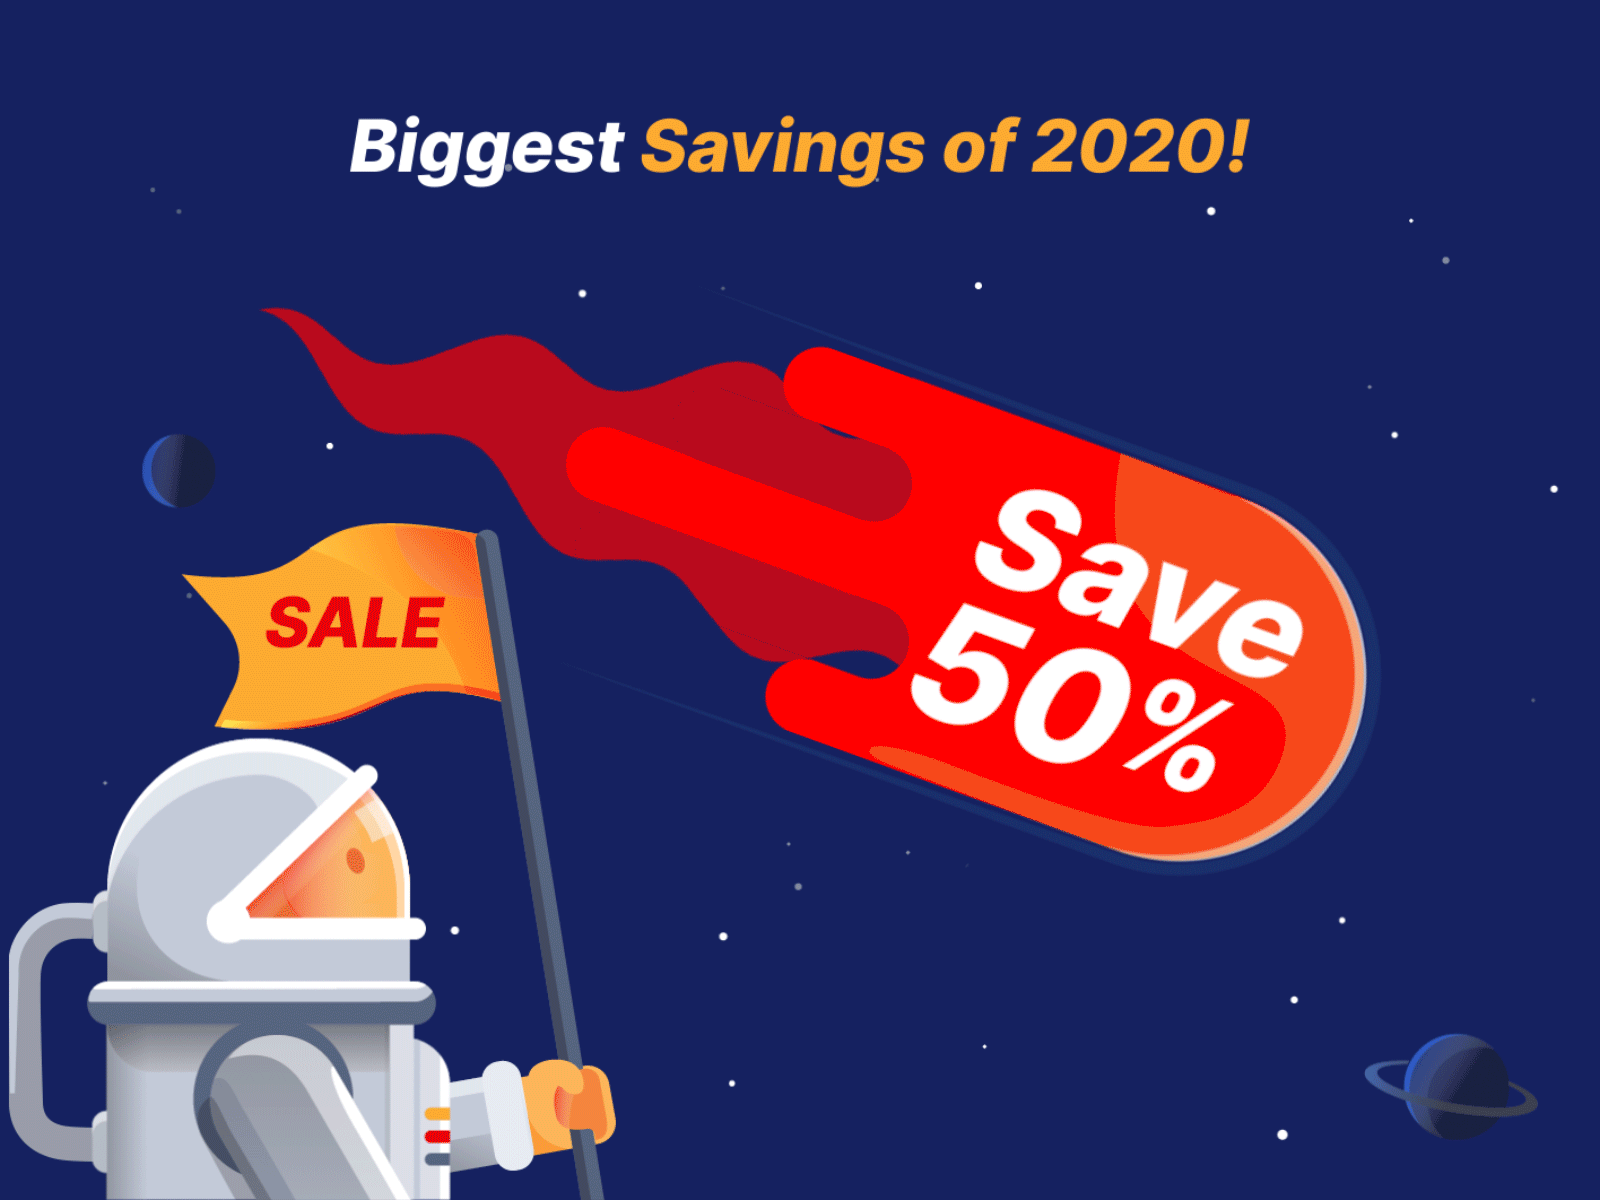 End Of Year 2020 Sale astroid astronaut end of year sale gif loop animation meteor planet sale sale banner space stars